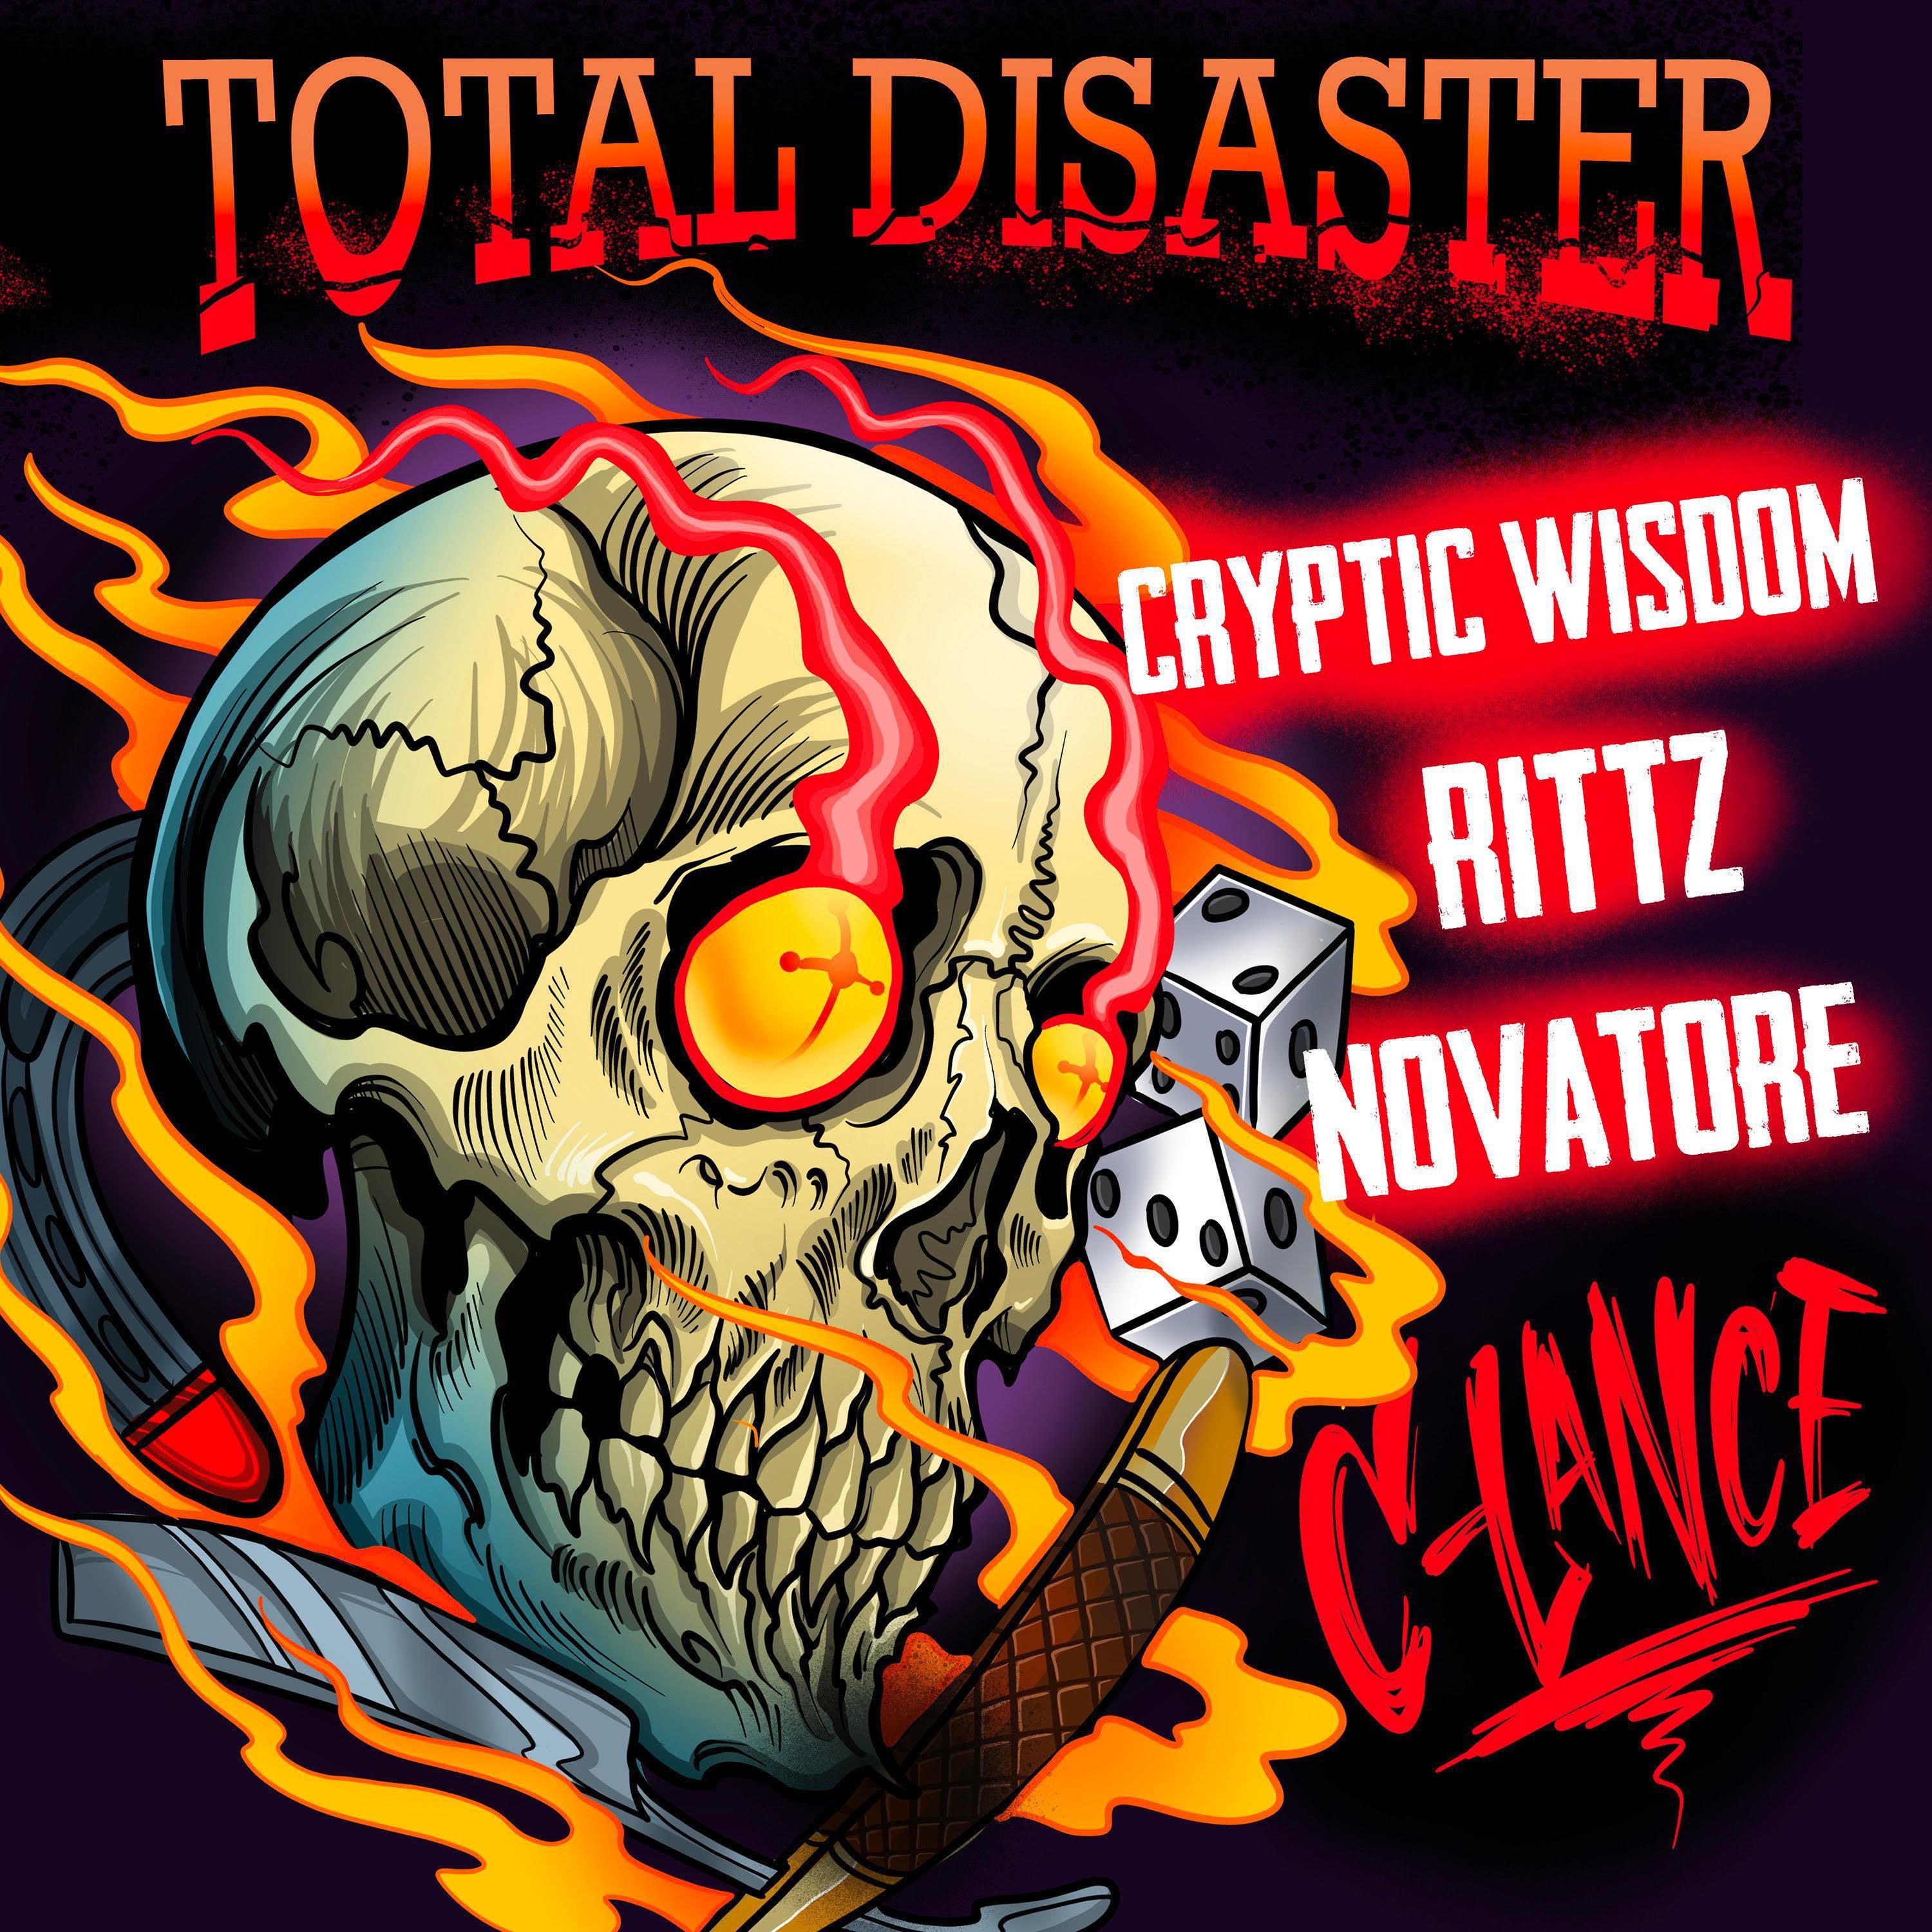 C-Lance - Total Disaster (feat. Novatore & Cryptic Wisdom)